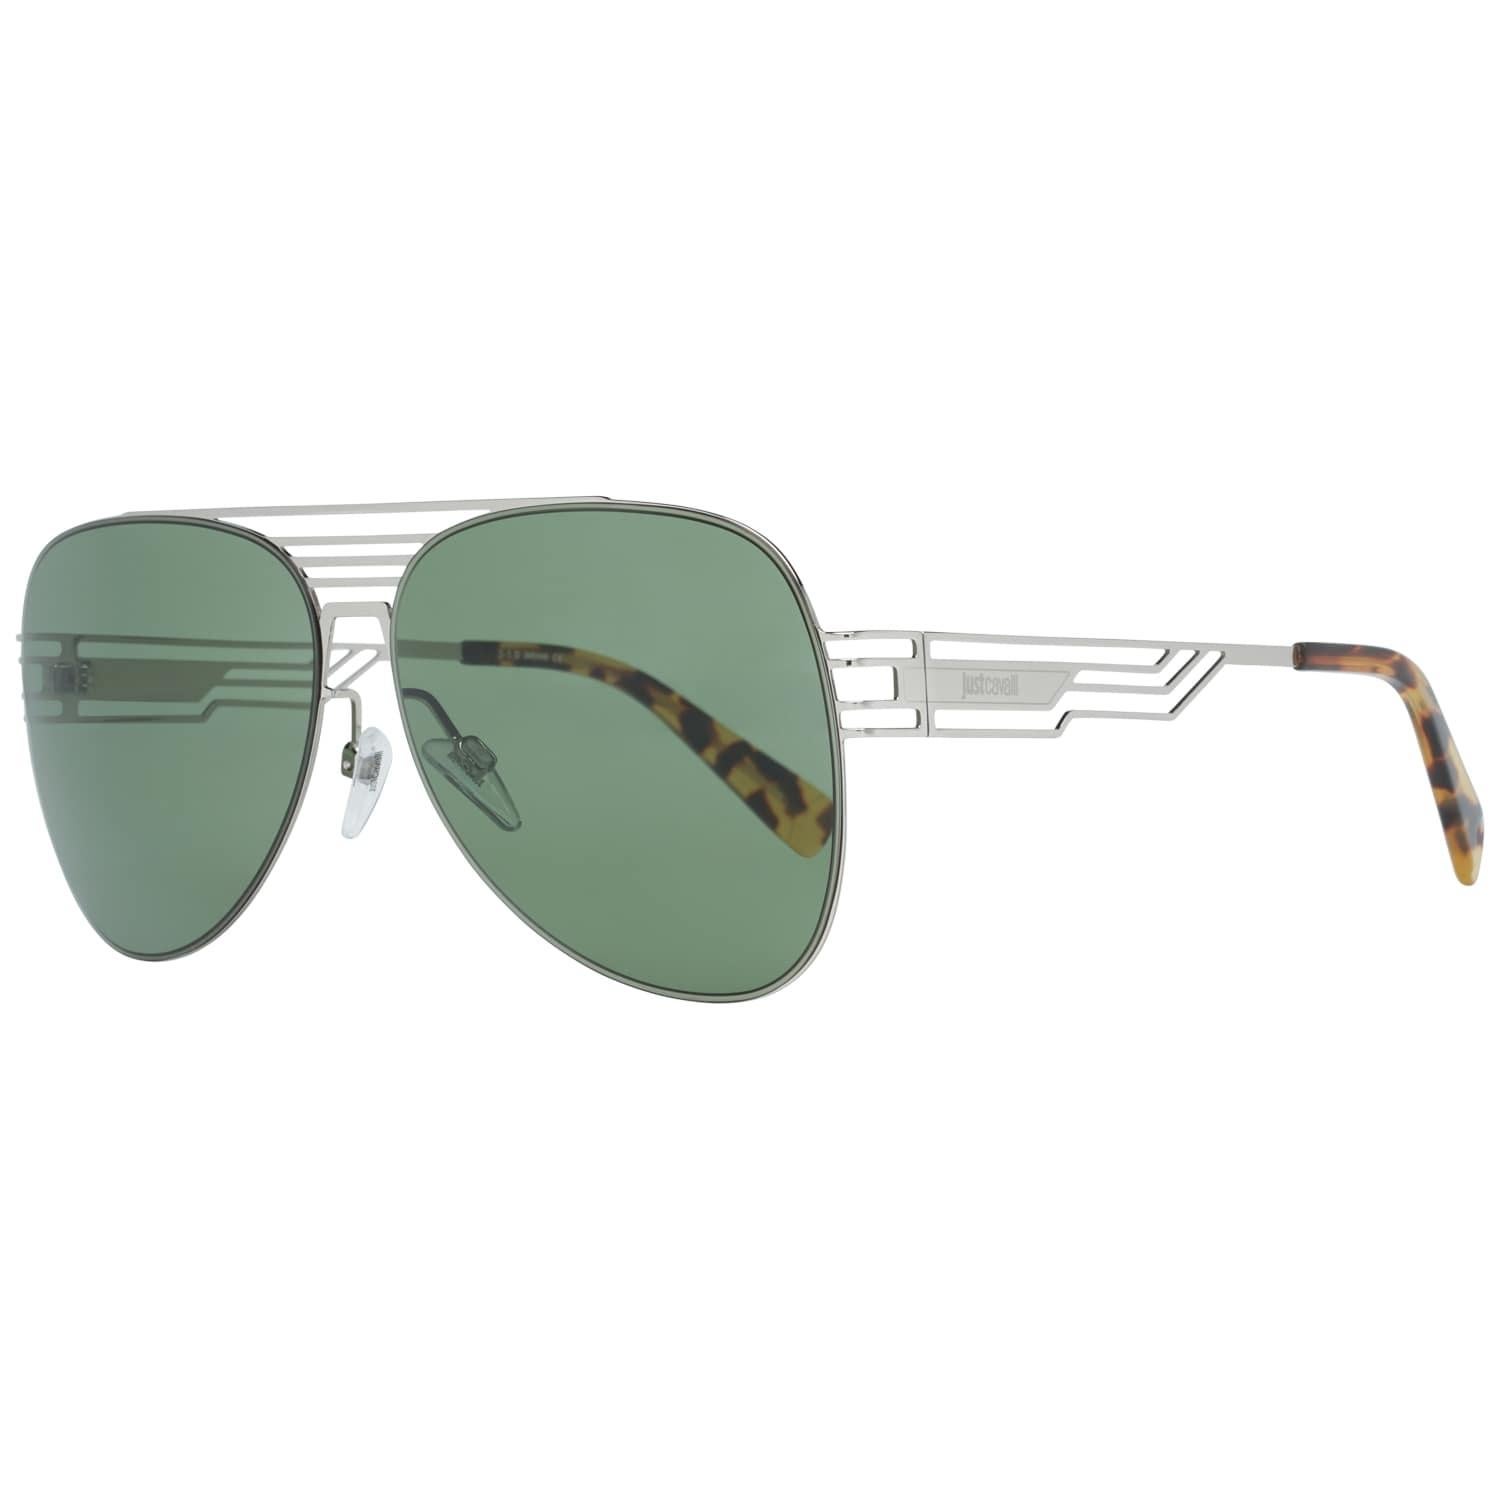 Details
MATERIAL: Metal
COLOR: Silver
MODEL: JC914S 6116N
GENDER: Adult Unisex
COUNTRY OF MANUFACTURE: China
TYPE: Sunglasses
ORIGINAL CASE?: Yes
STYLE: Aviator
OCCASION: Casual
FEATURES: Lightweight
LENS COLOR: Green
LENS TECHNOLOGY: No Extra
YEAR